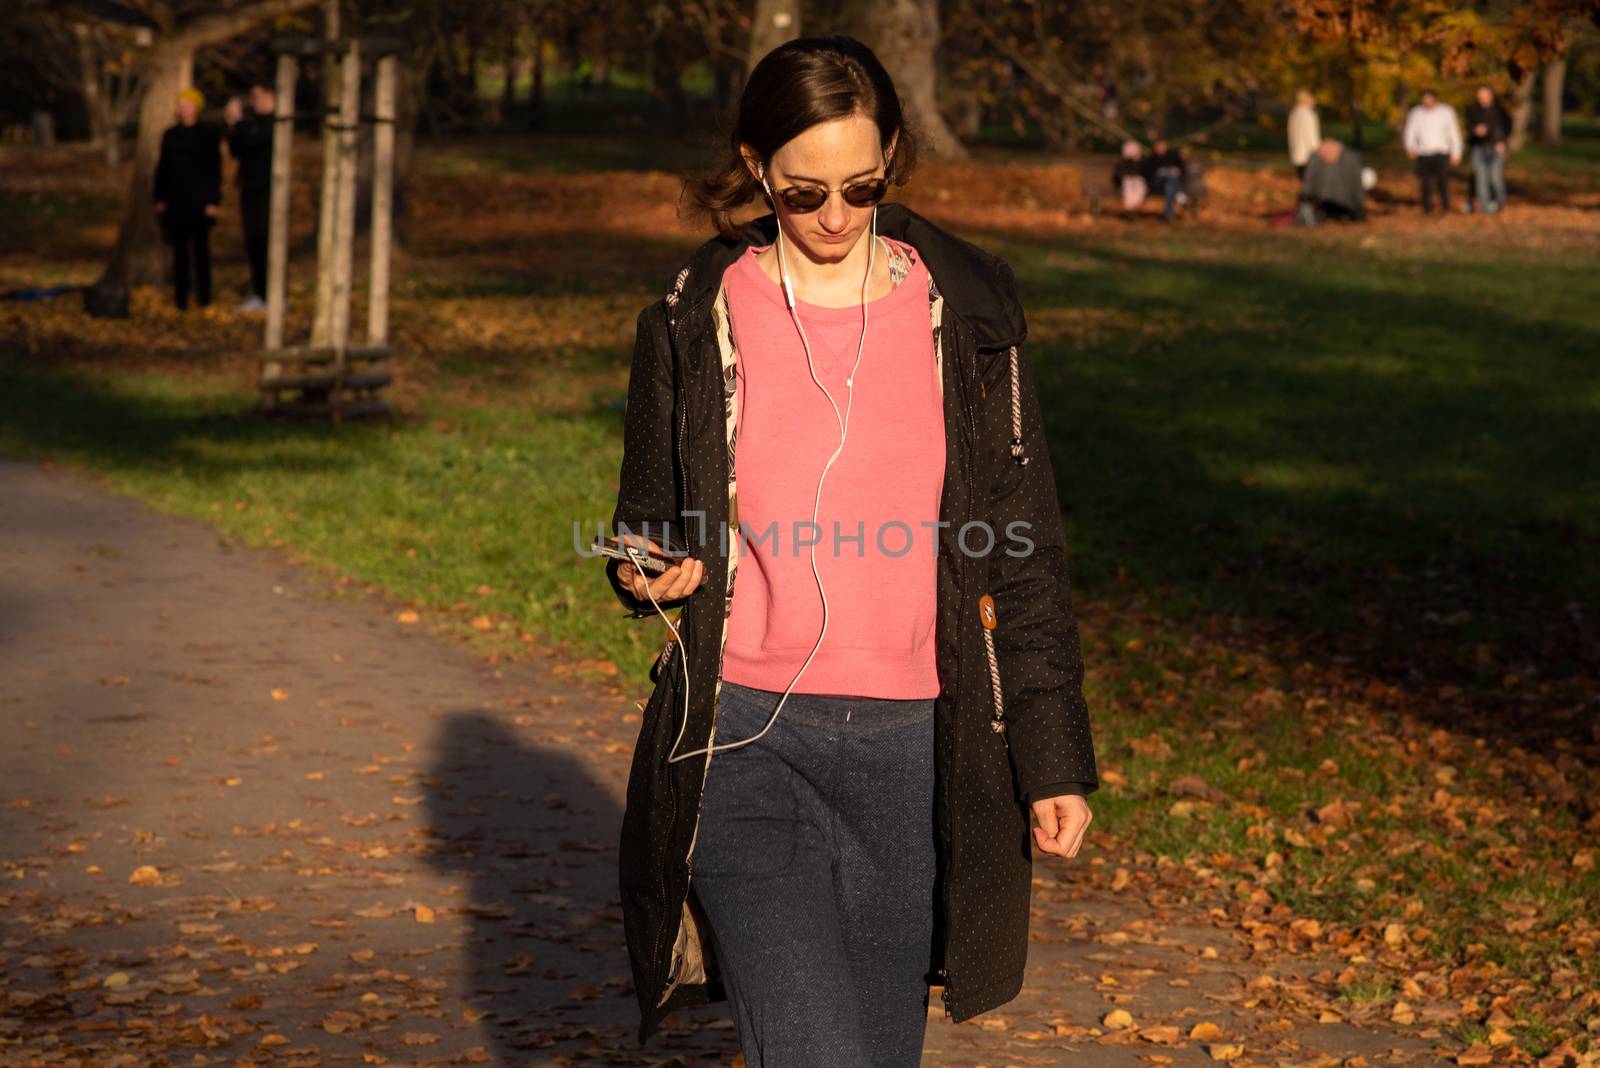 11/14/2020. Park Stromovka. Prague czech Republic. A woman is walking in the park on a Sunday winter day.